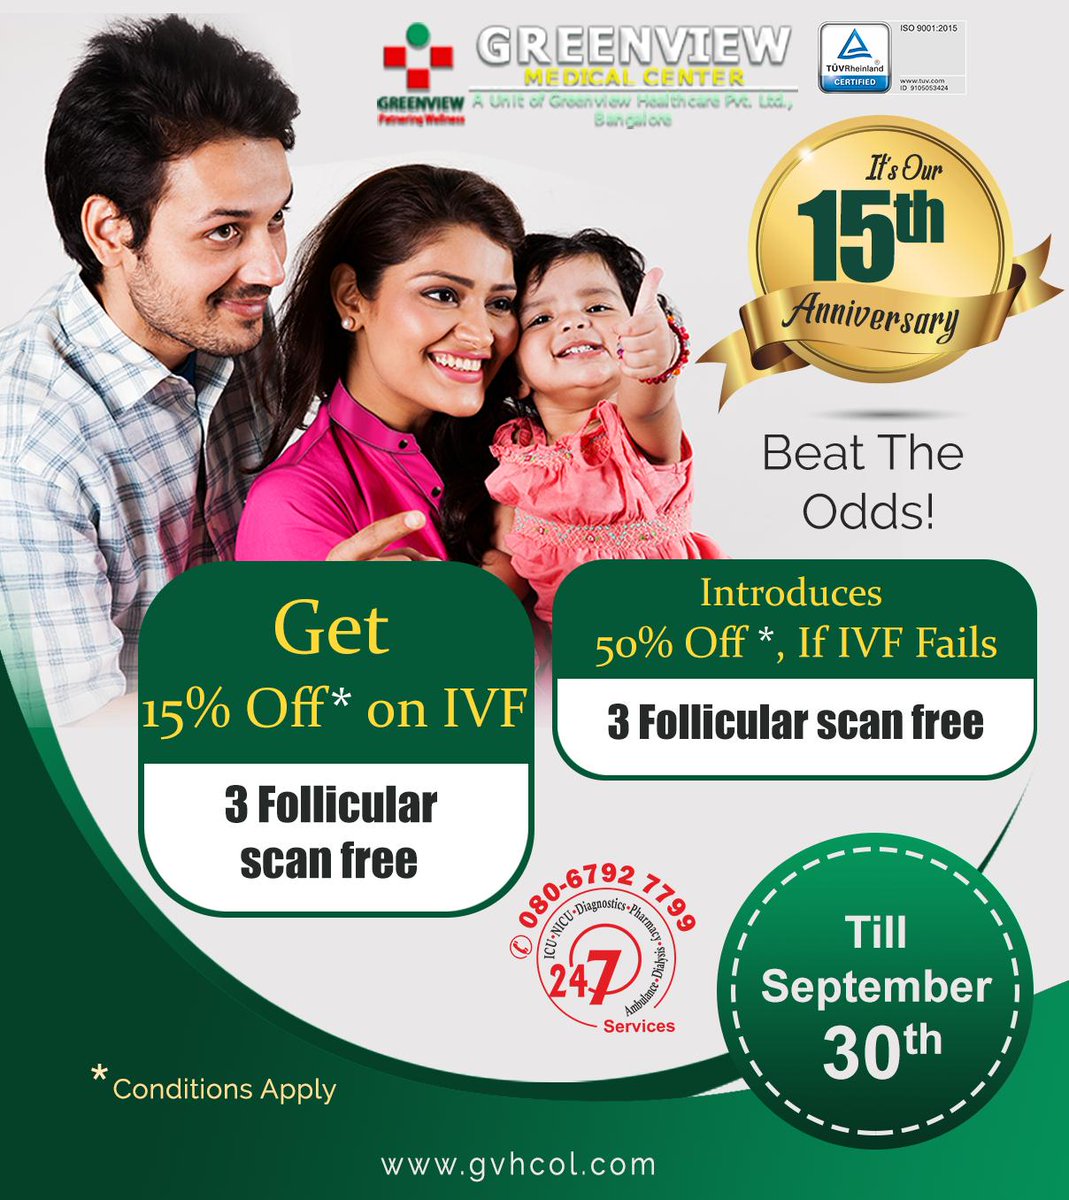 *Get 15% off on IVF - 3 Follicular scan free excluding medicine
*Introduces 50% Off, If IVF Fails - 3 Follicular scan free excluding medicine
*Offer valid till September 30th, 2019
*Terms and conditions applicable
Know More @ gvhcol.com/contact-us
#IVF #Offer #Fertilityoptions